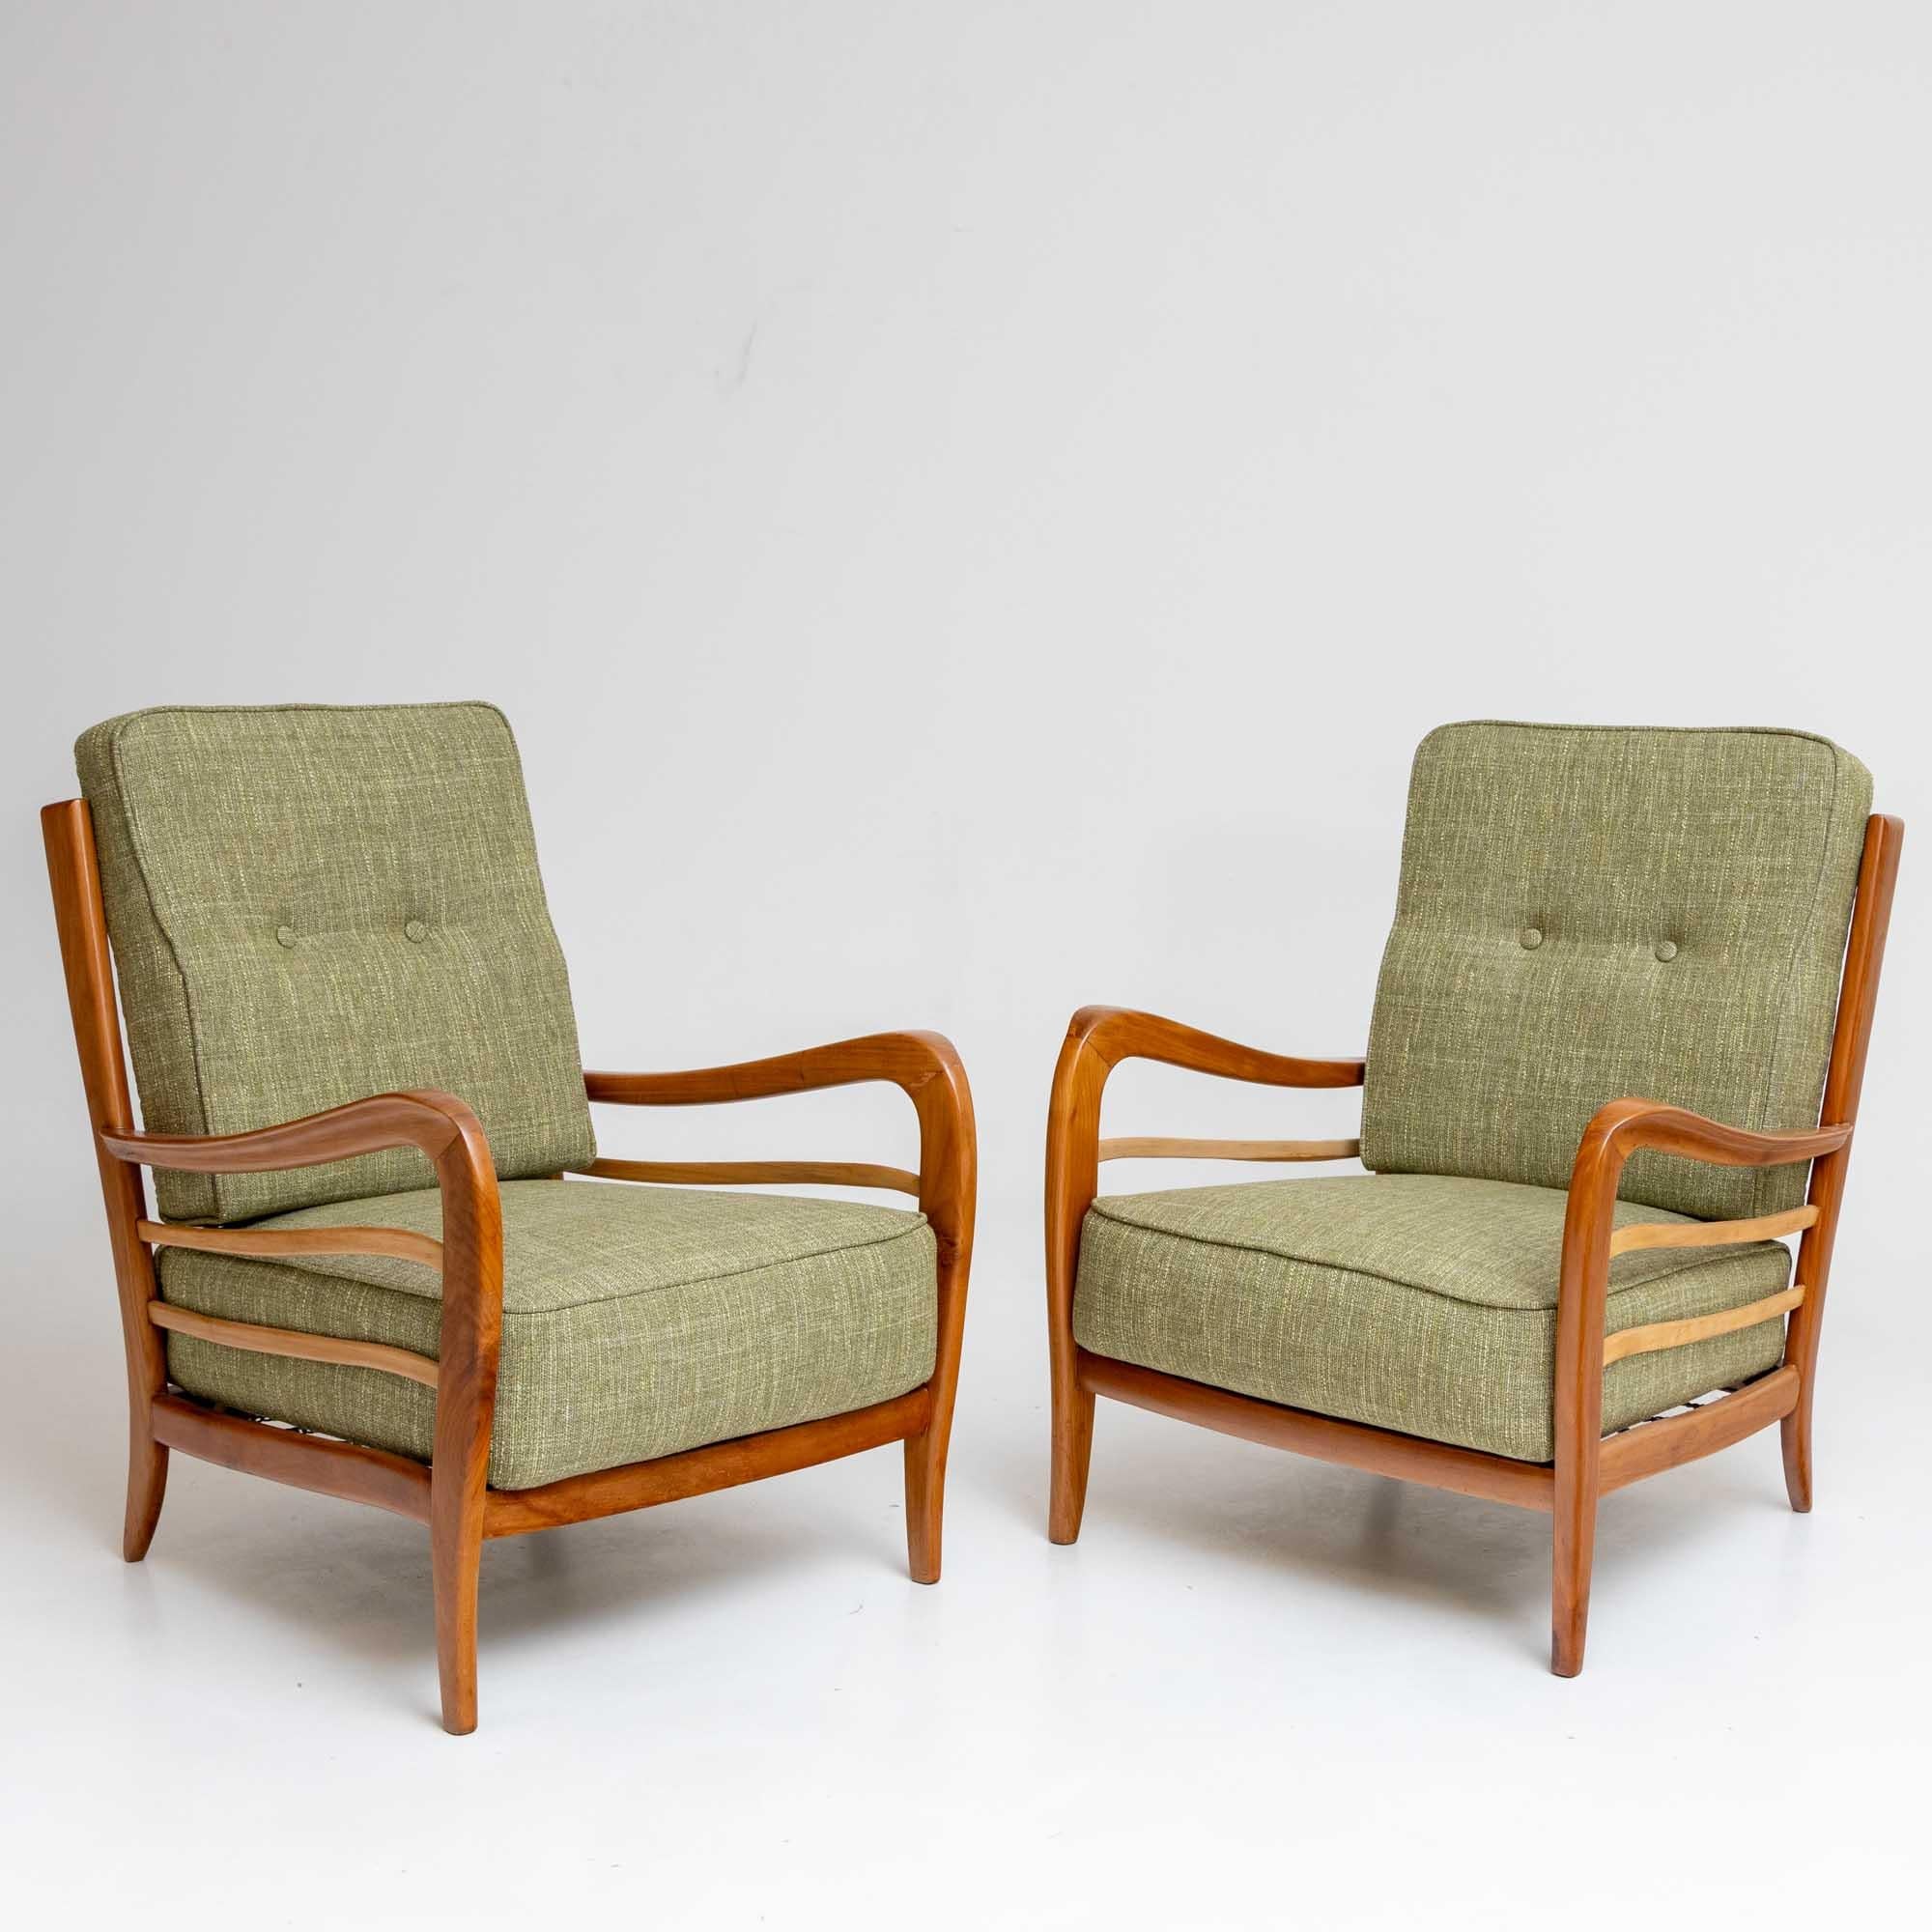 Pair of Lounge Chairs in Cherry, green Upholstery attr. Paolo Buffa, Italy 1950s For Sale 3